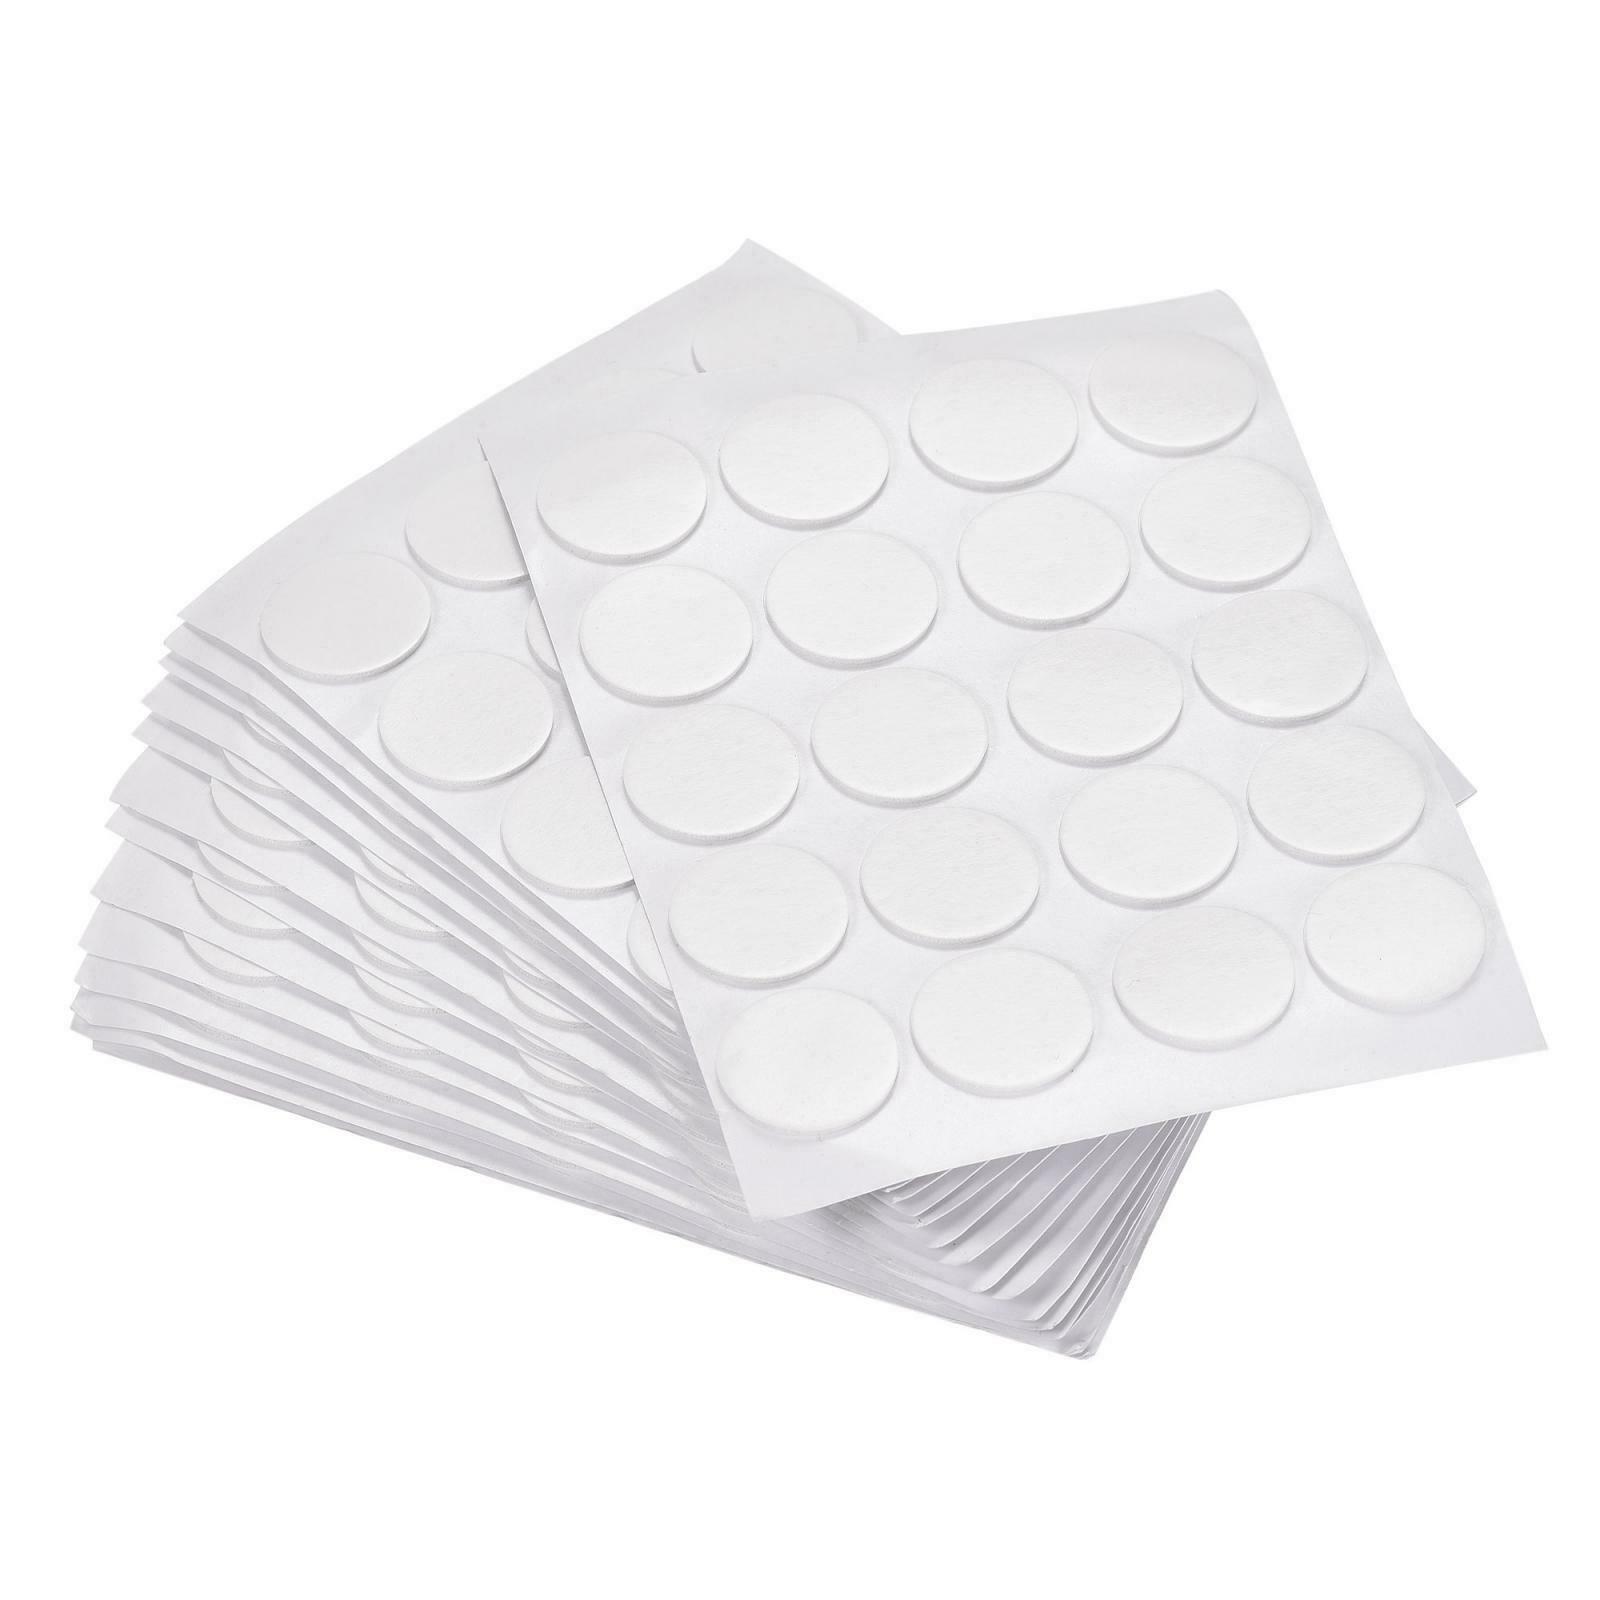 300pcs Candle Wick Stickers 20mm Double-sided Heat-resistant Adhesive Foam Dots